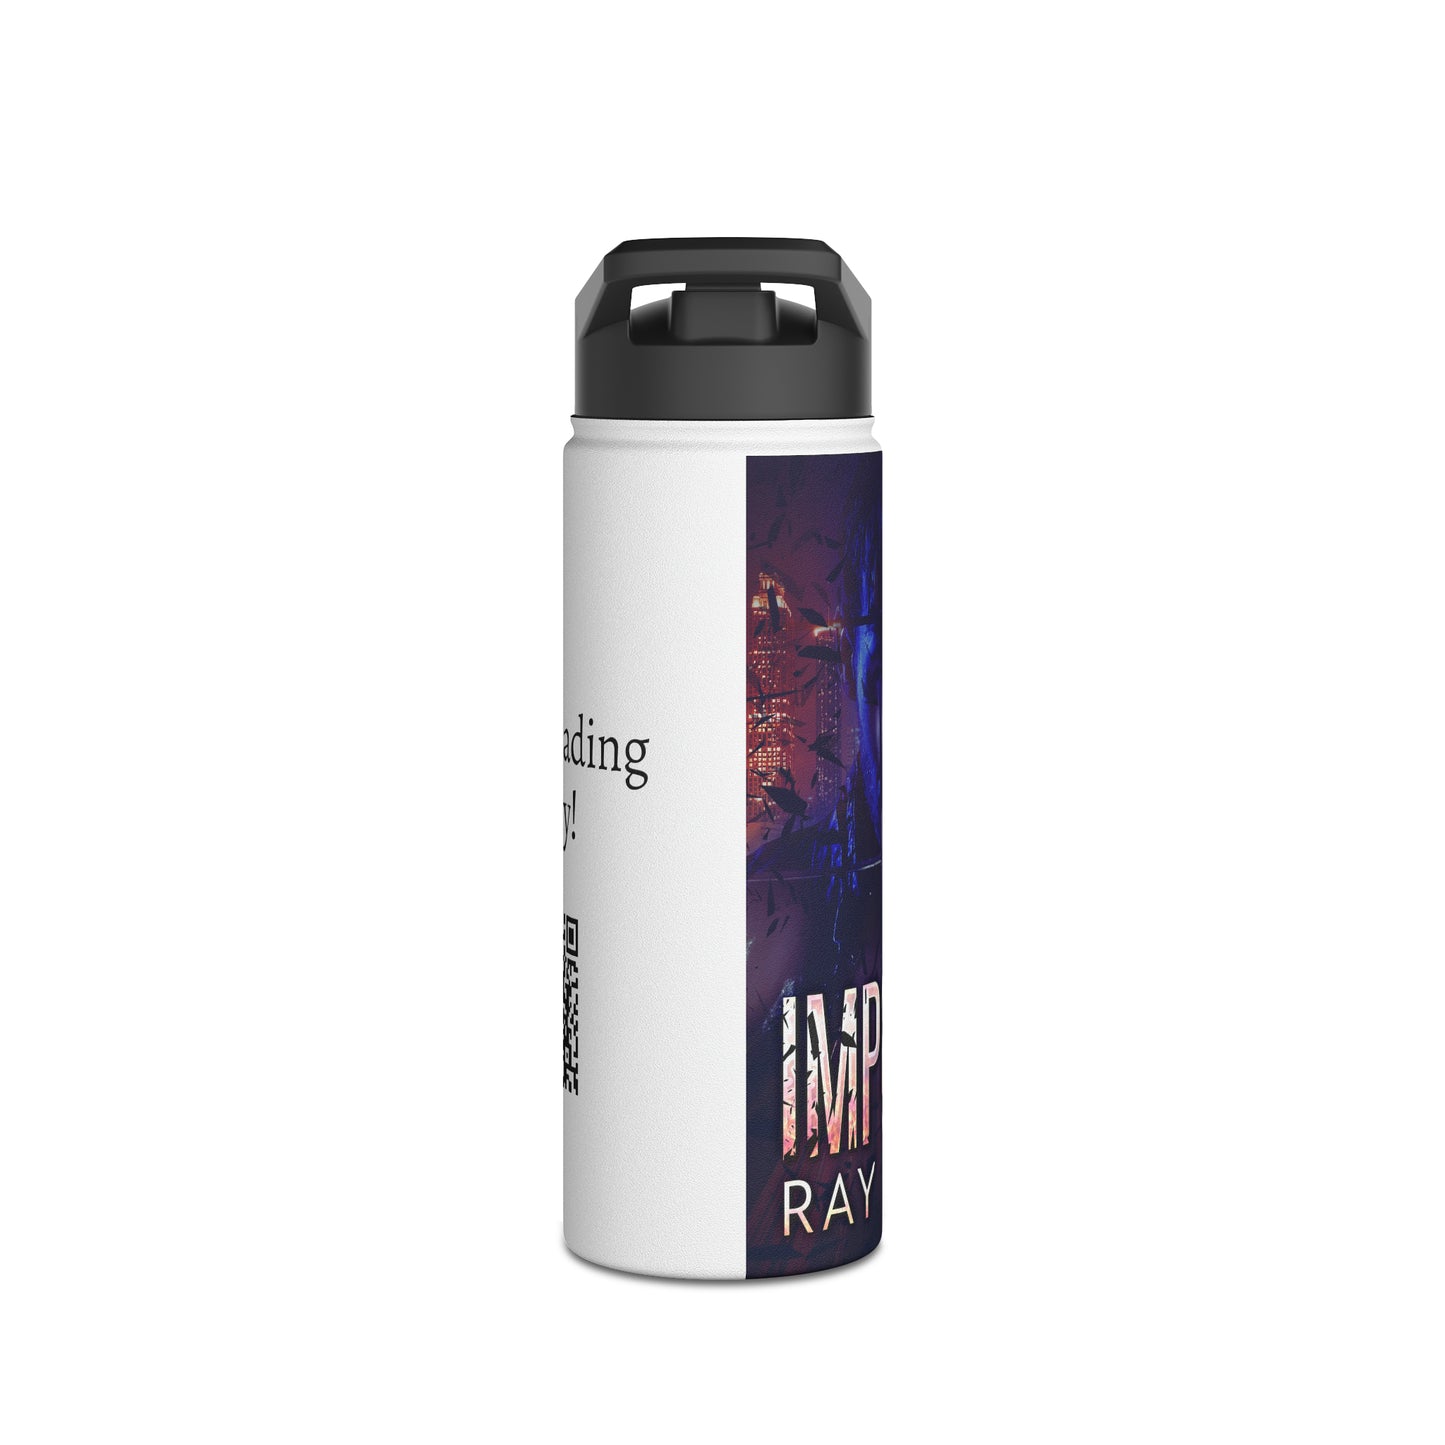 Imposter - Stainless Steel Water Bottle